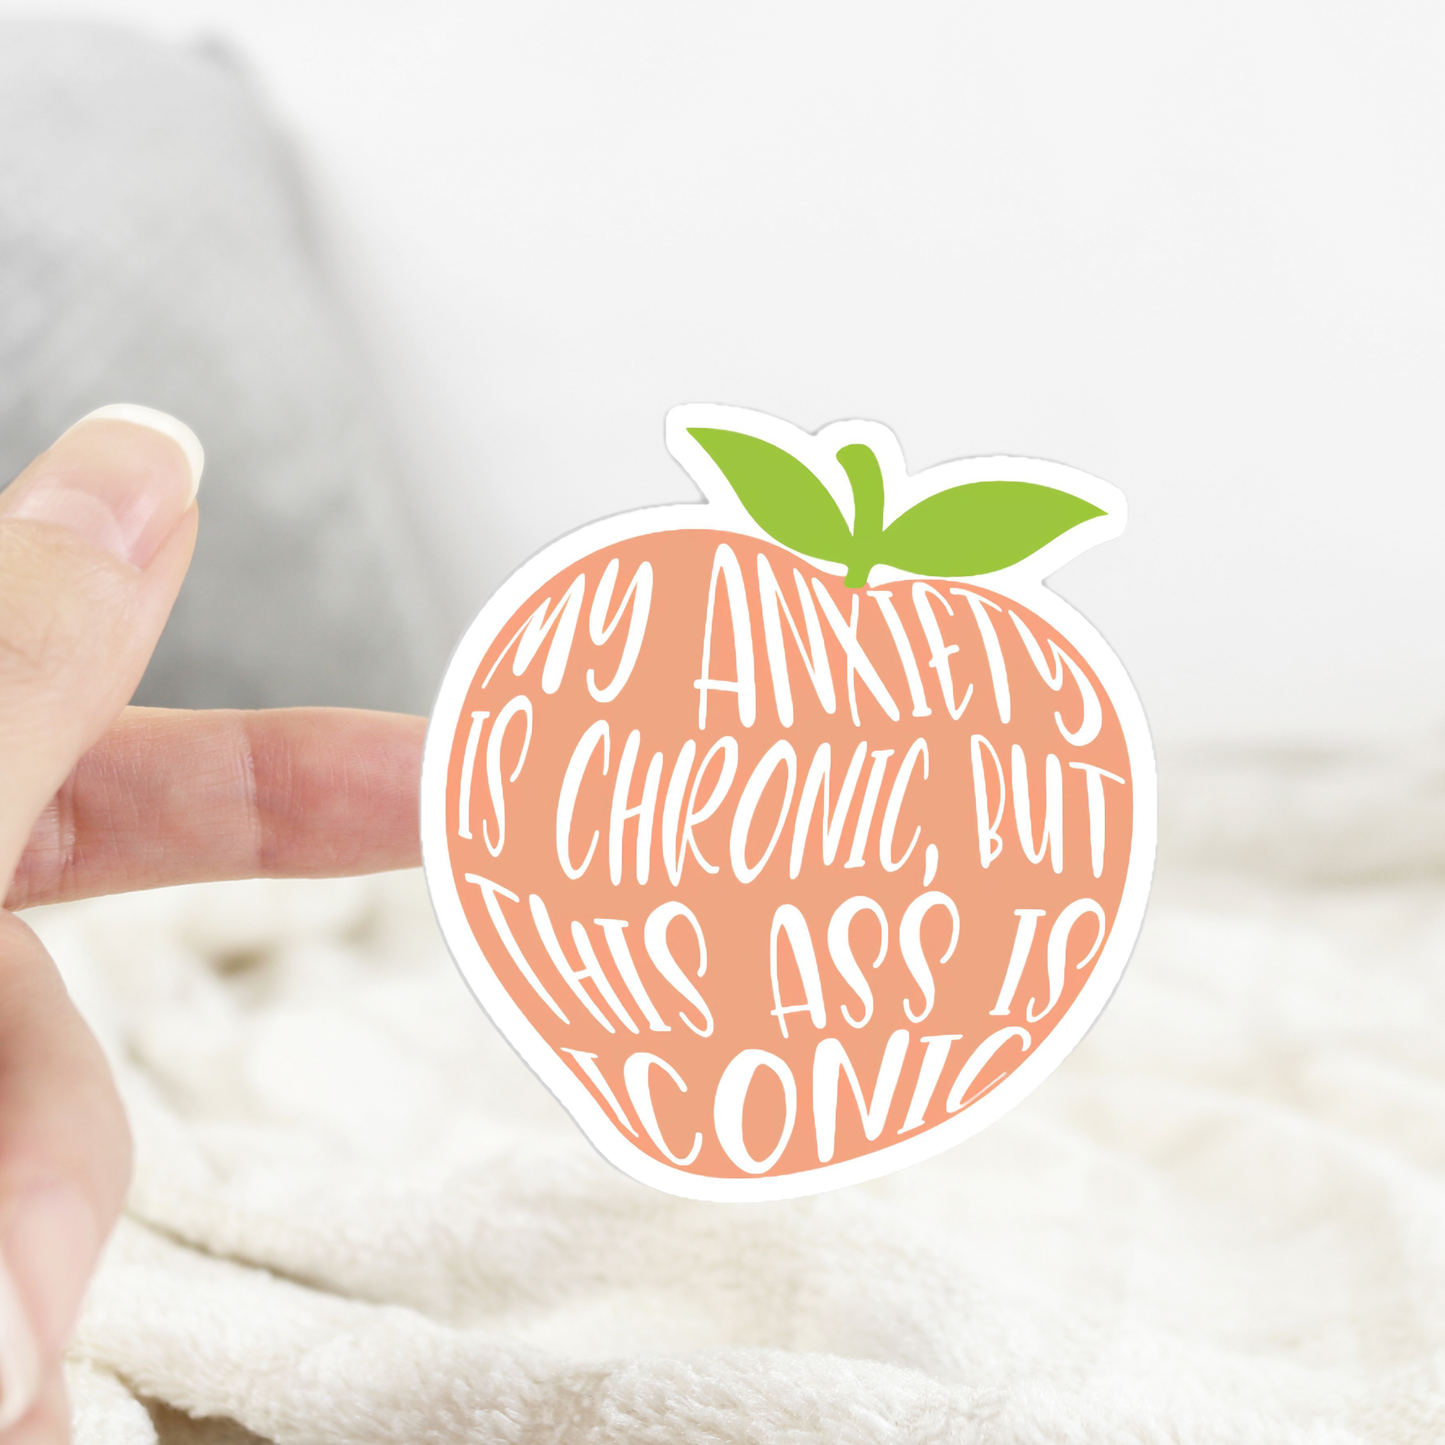 Peach Anxiety is Chronic, But This A*s is Iconic Sticker